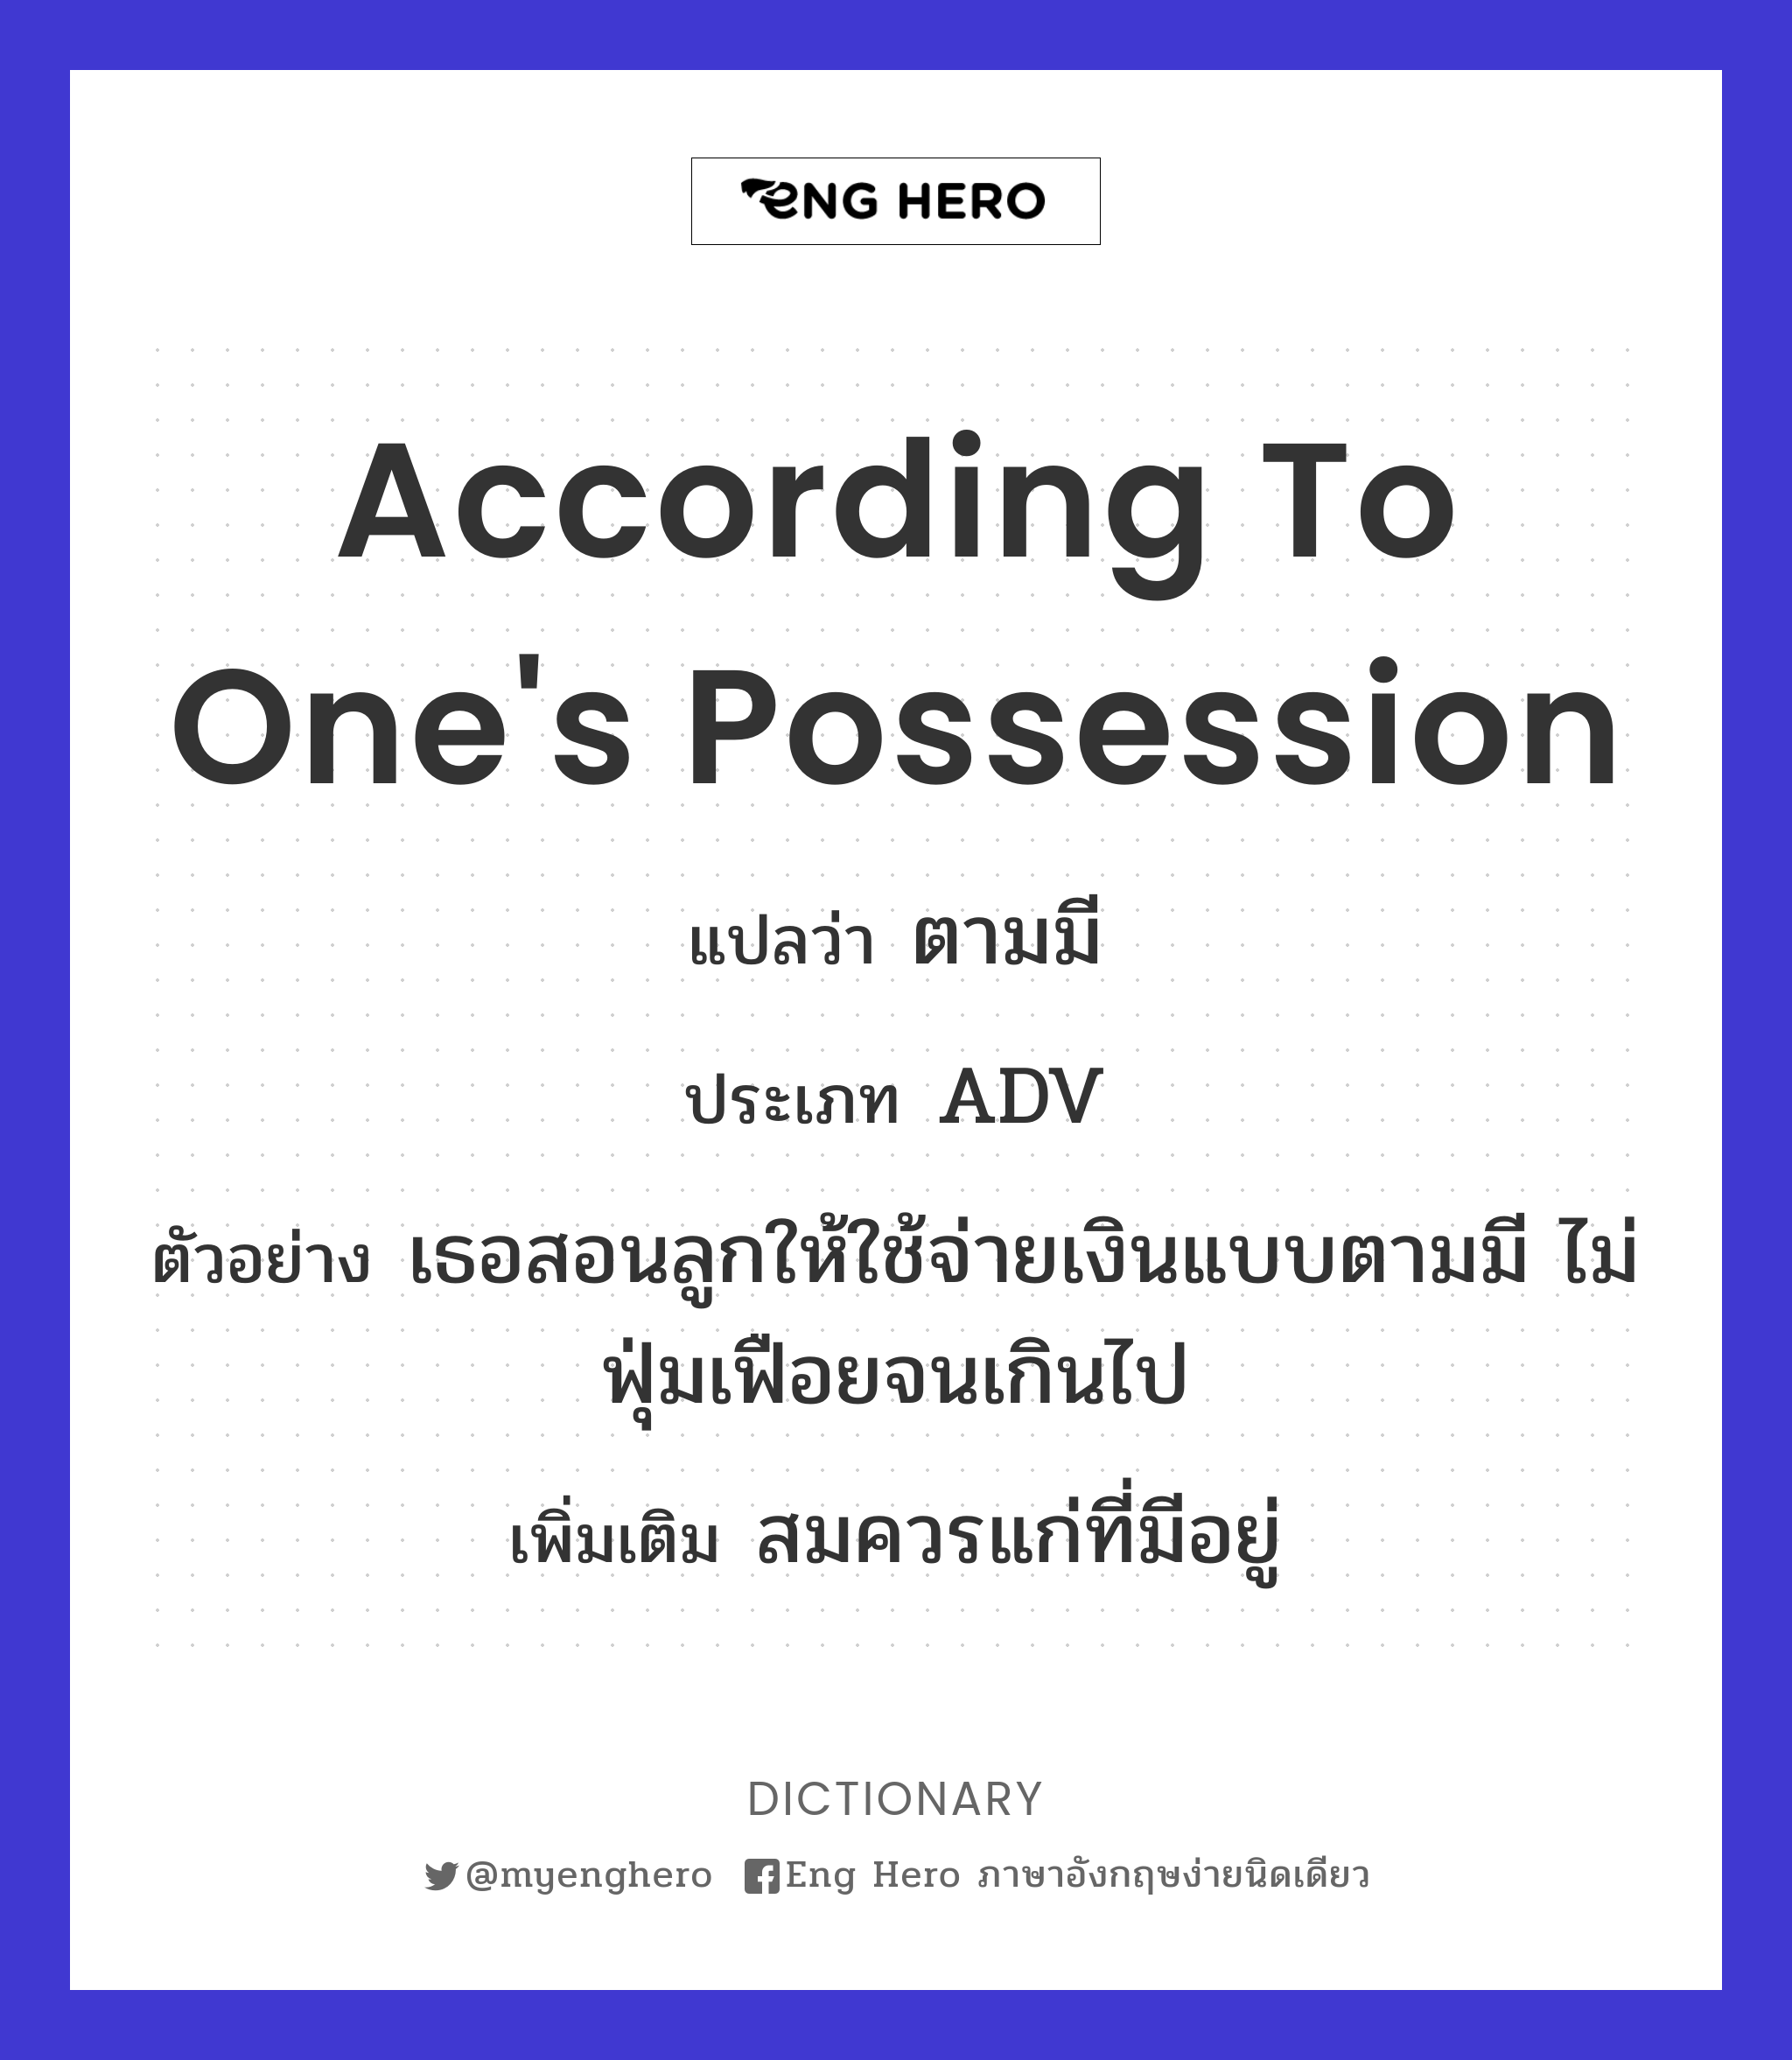 according to one's possession